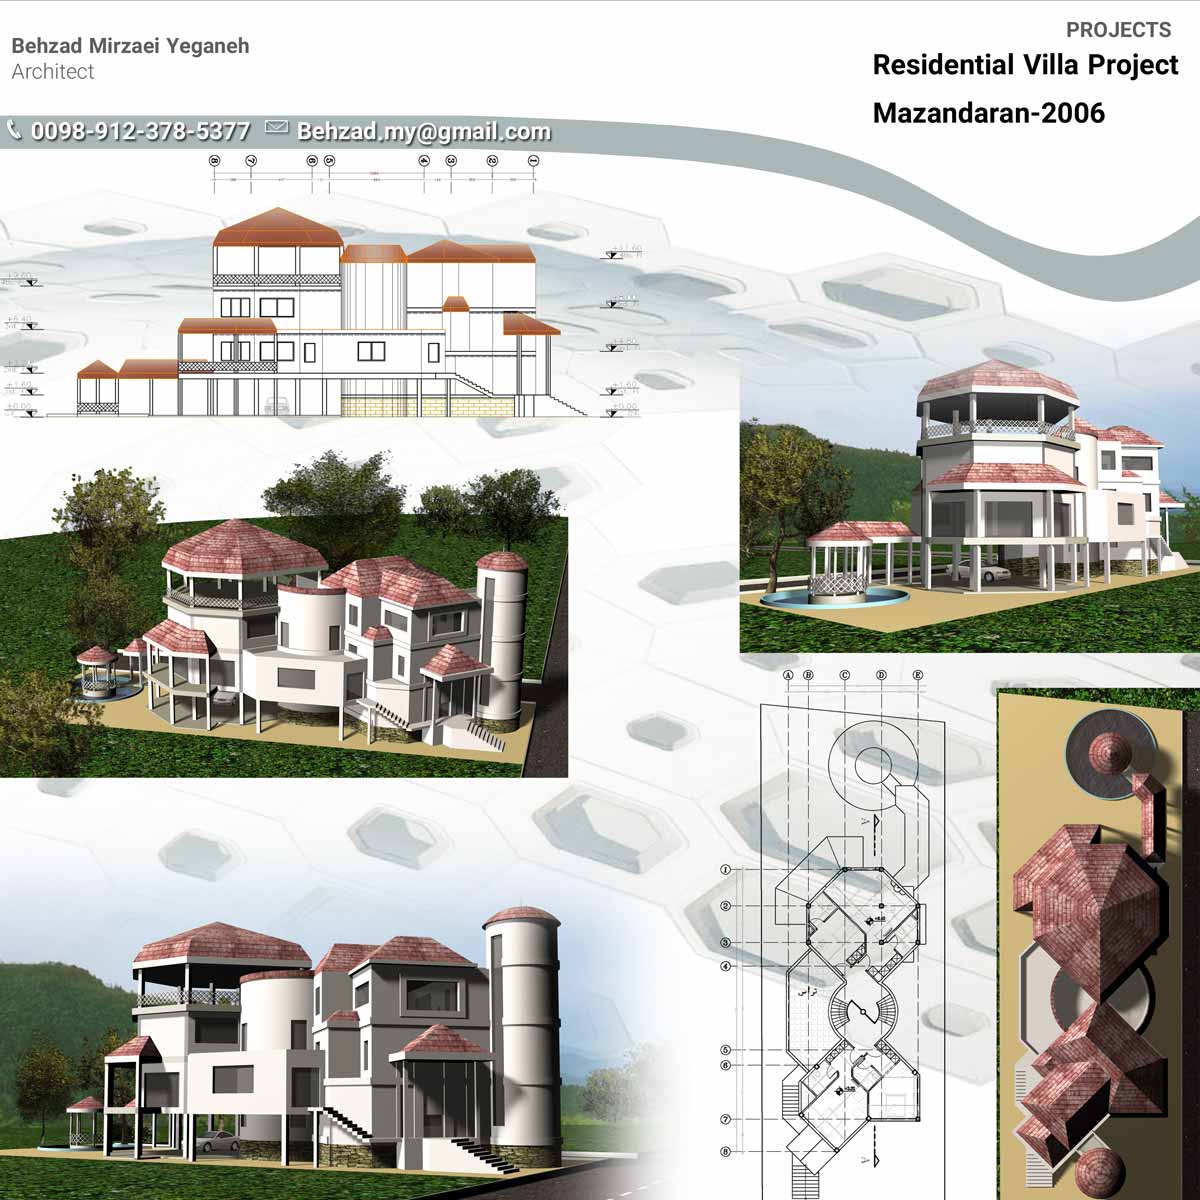 Residential Villa Project